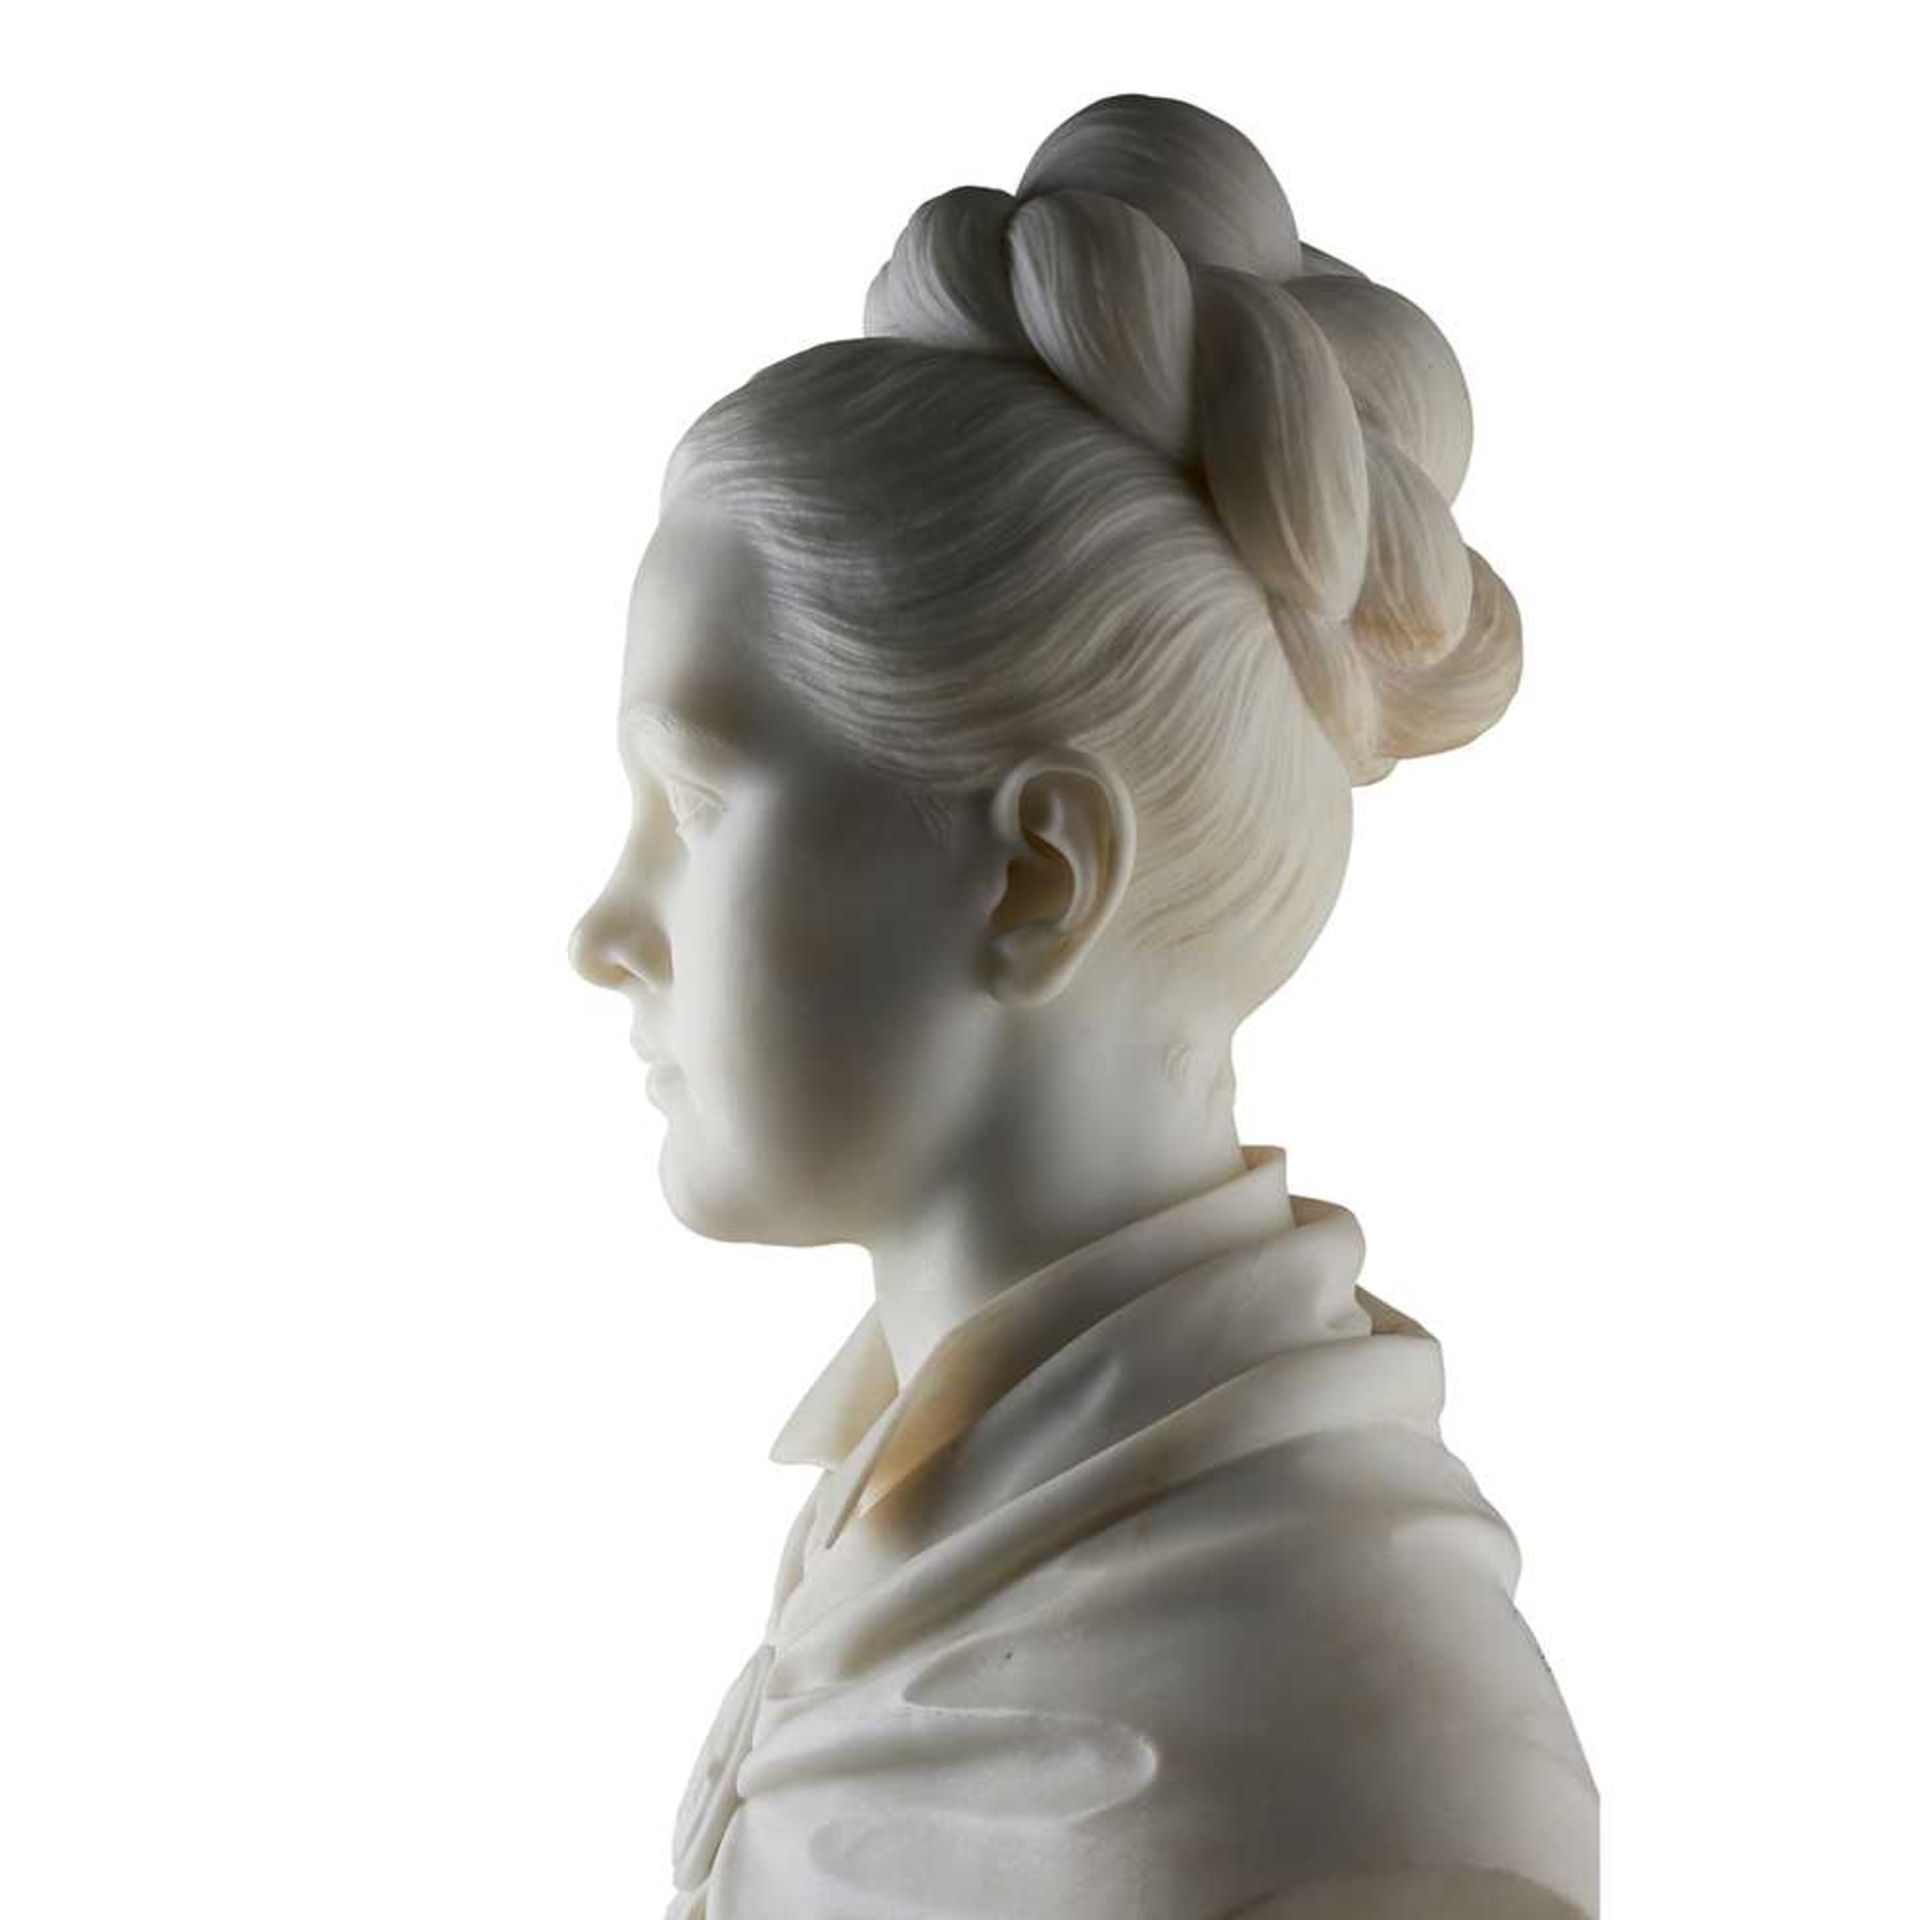 GIOSUÈ ARGENTI (ITALIAN, 1819-1901) MARBLE BUST OF A YOUNG WOMAN, DATED 1875 - Image 4 of 5